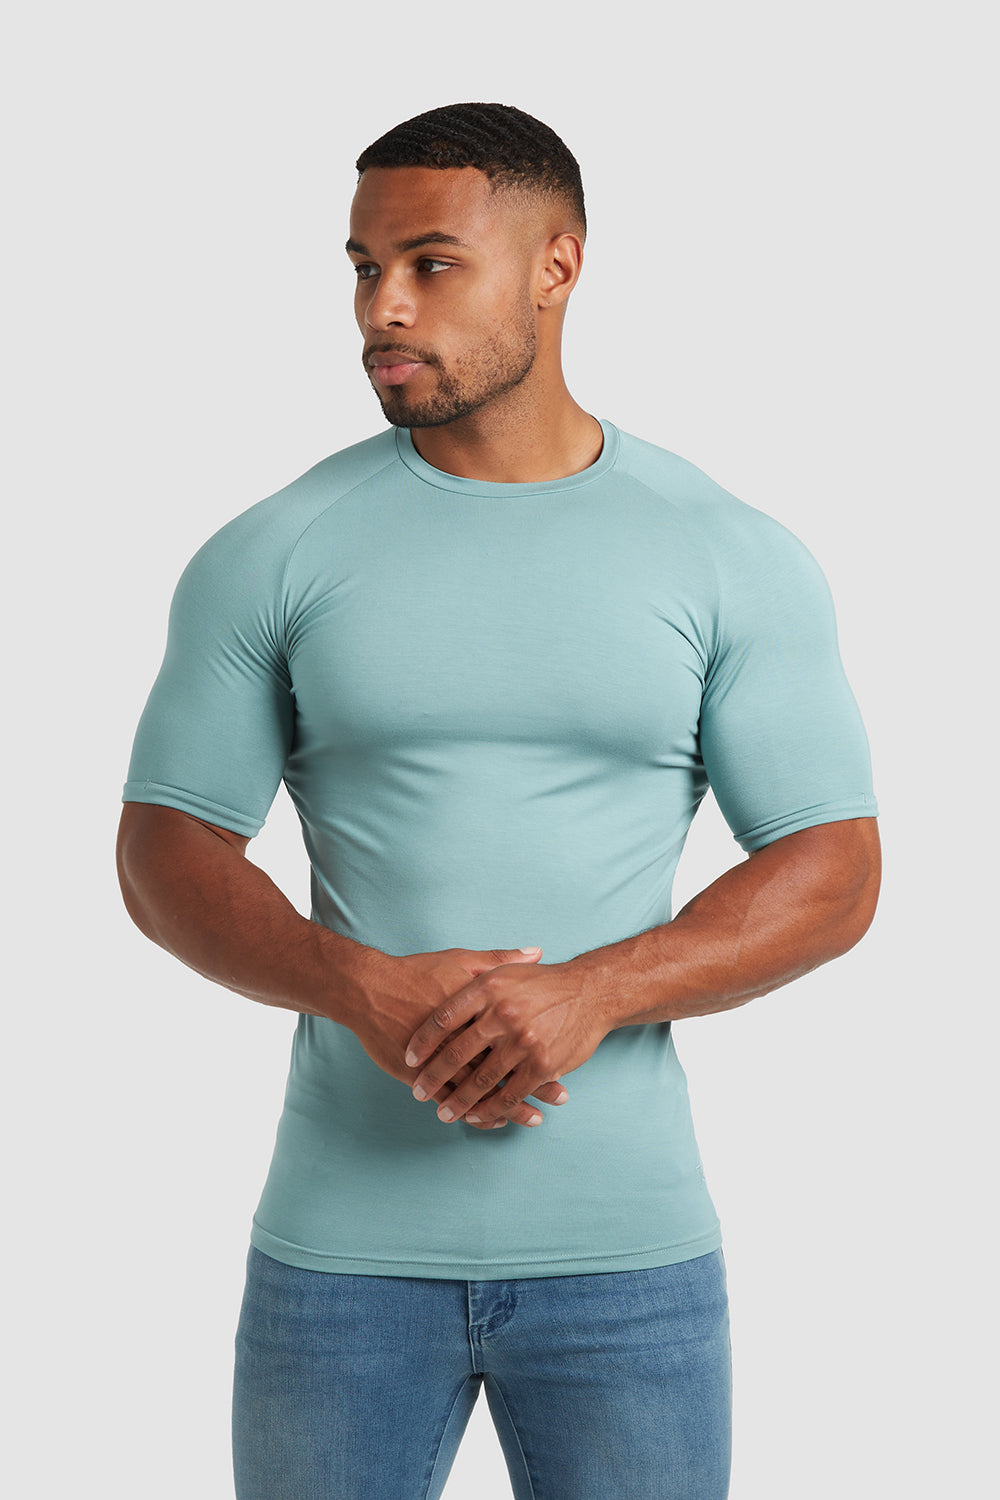 Bamboo Loop Back T-Shirt in Smoked Green - TAILORED ATHLETE - ROW